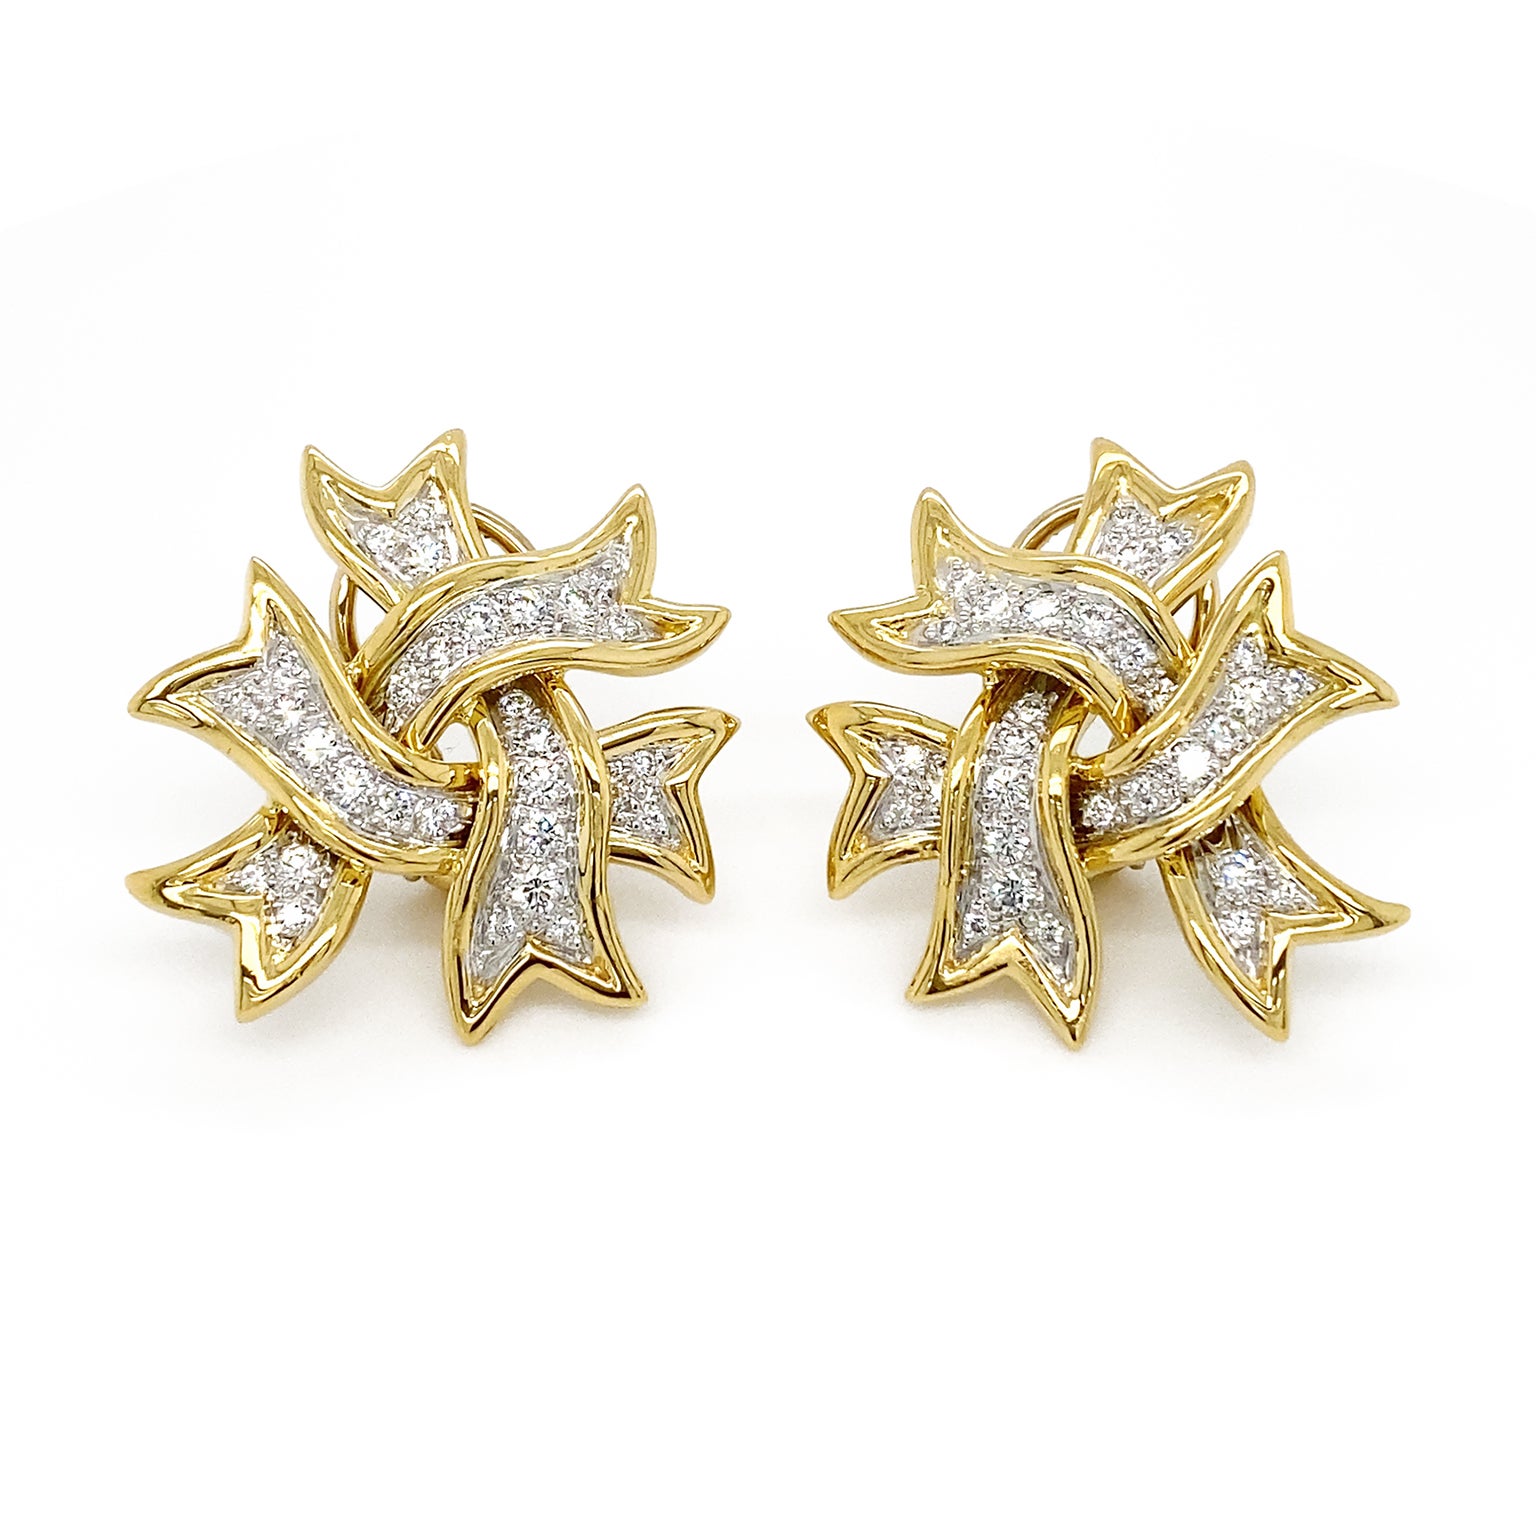 Ribbons bring a festive heart to these earrings. Three 18k yellow gold V-cut ribbons curve to overlay each other. Adorning the center of each ribbon are a row of platinum set brilliant cut diamonds, producing a white flare of light. The total weight